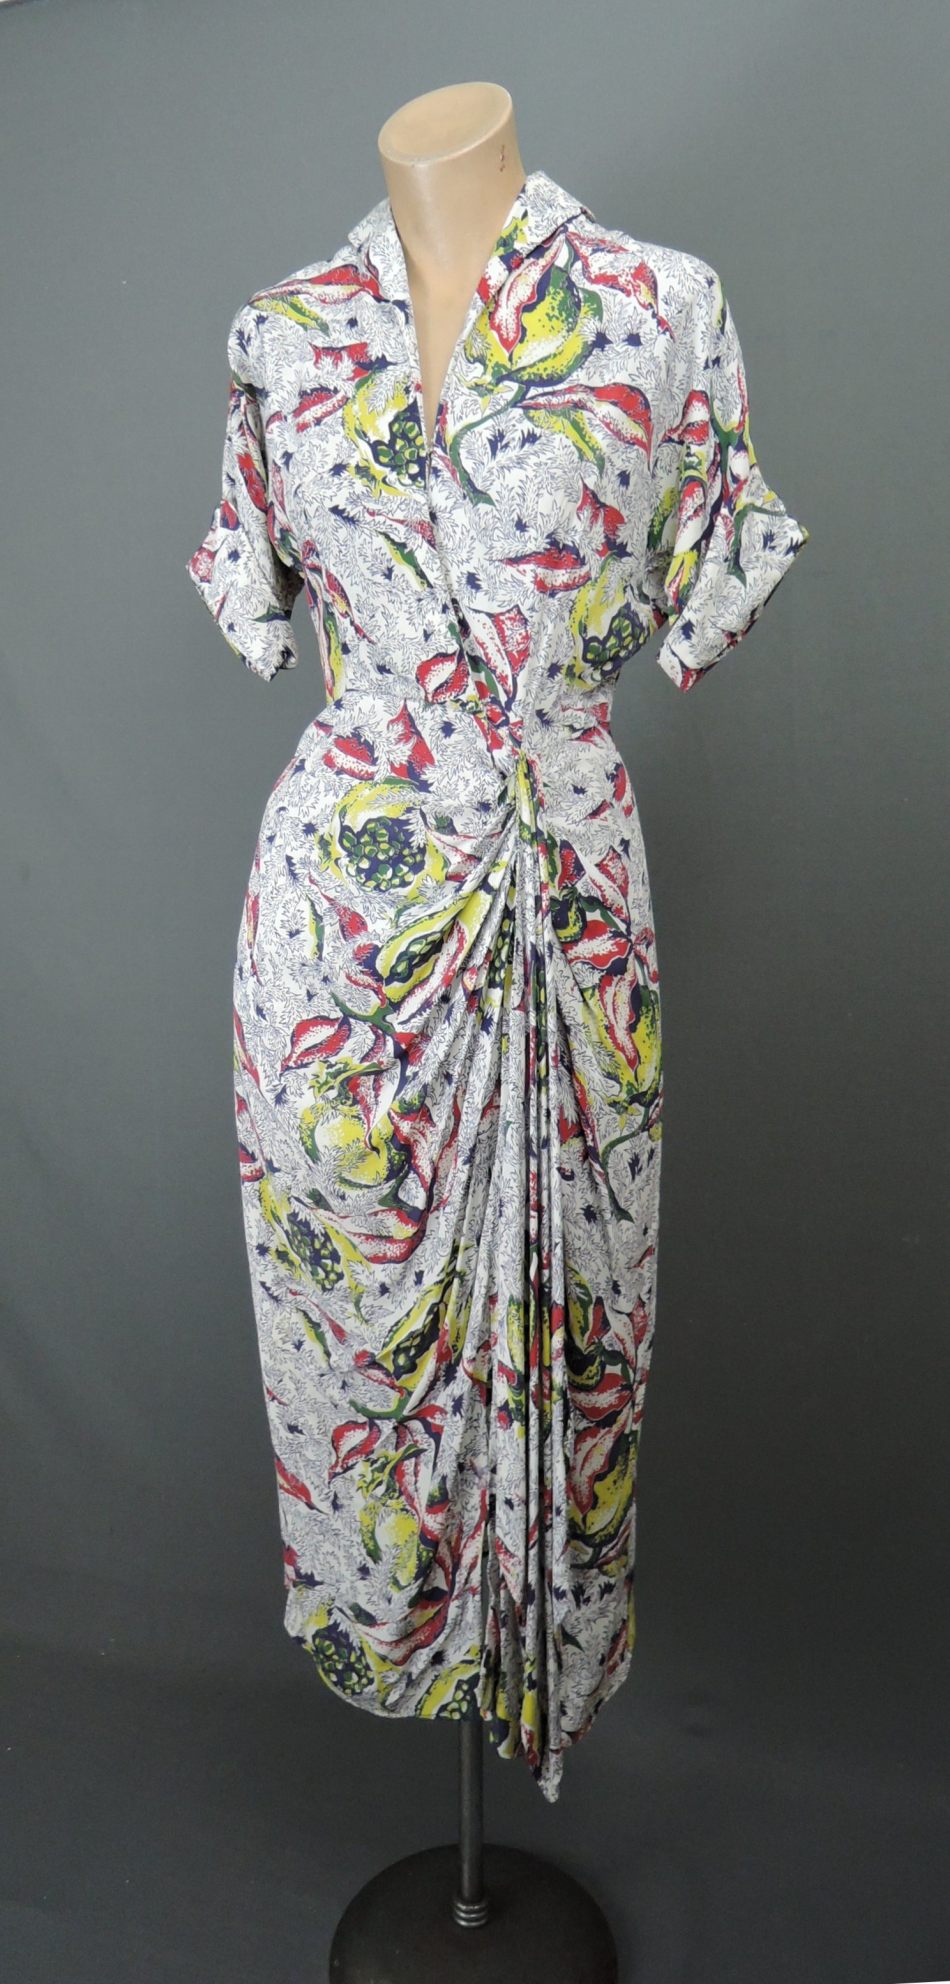 Vintage 1940s Draped Rayon Dress, Tropical Floral Print, fits 32 bust ...